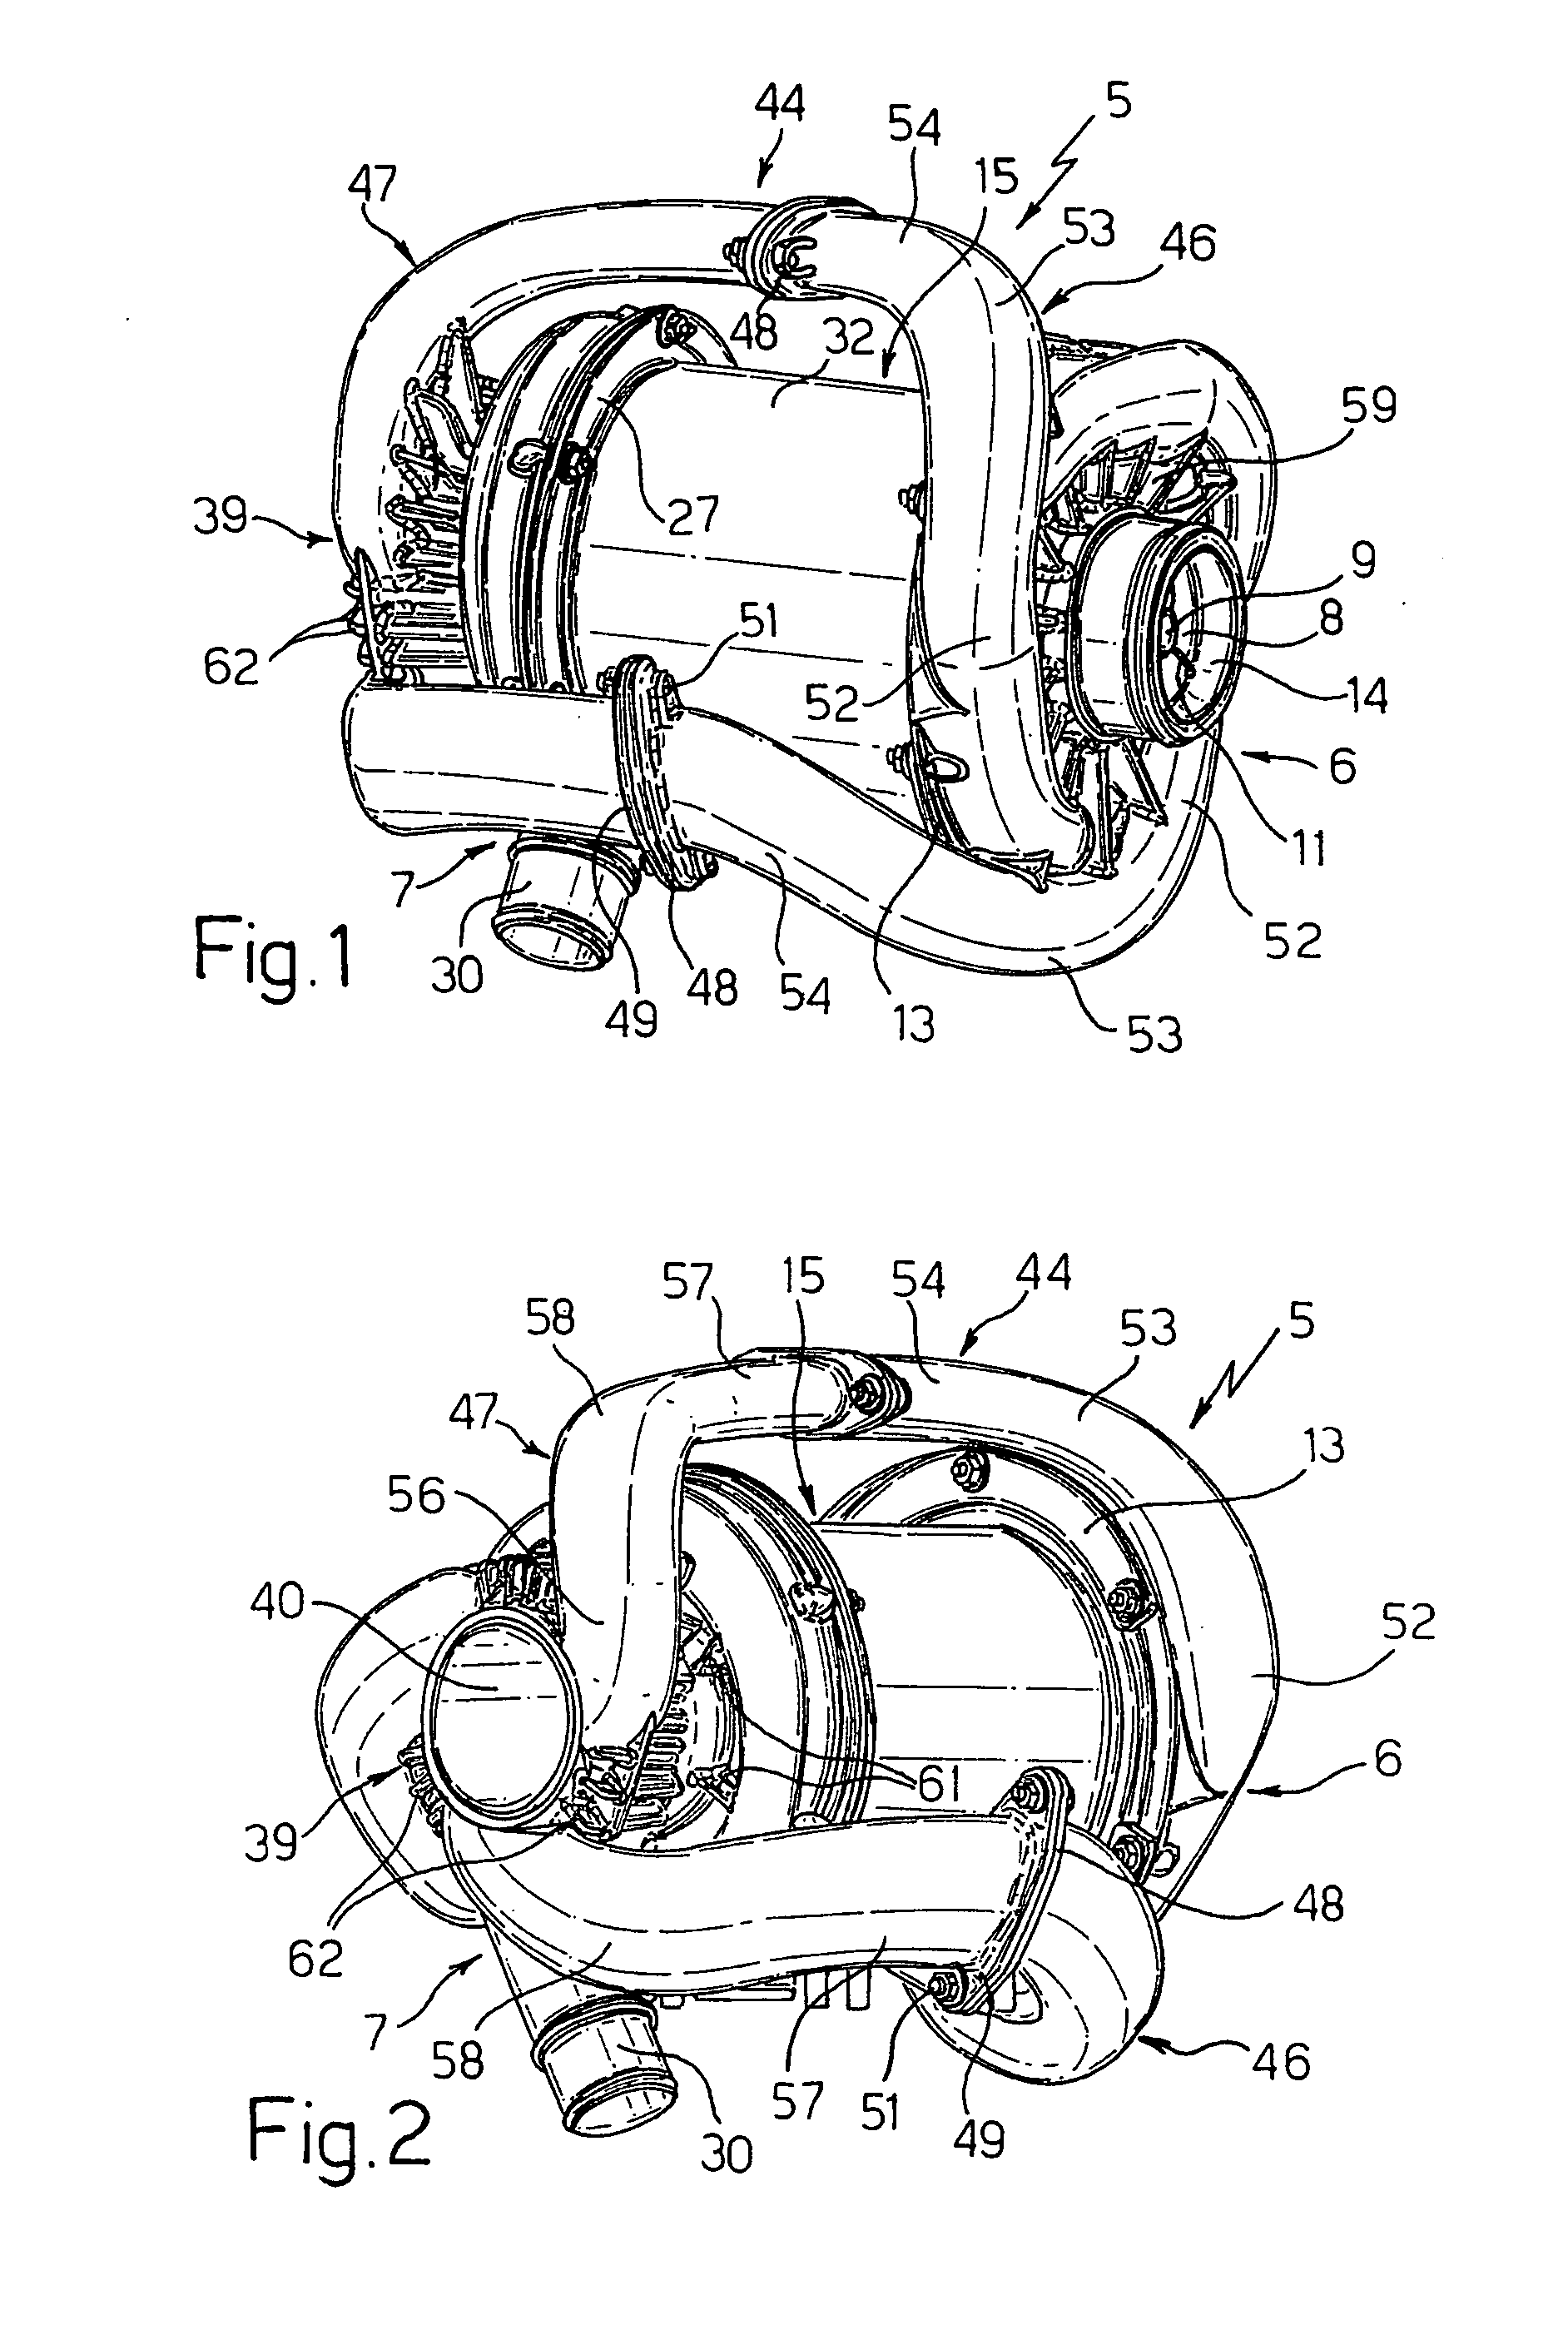 Multistage motor-compressor for the compression of a fluid